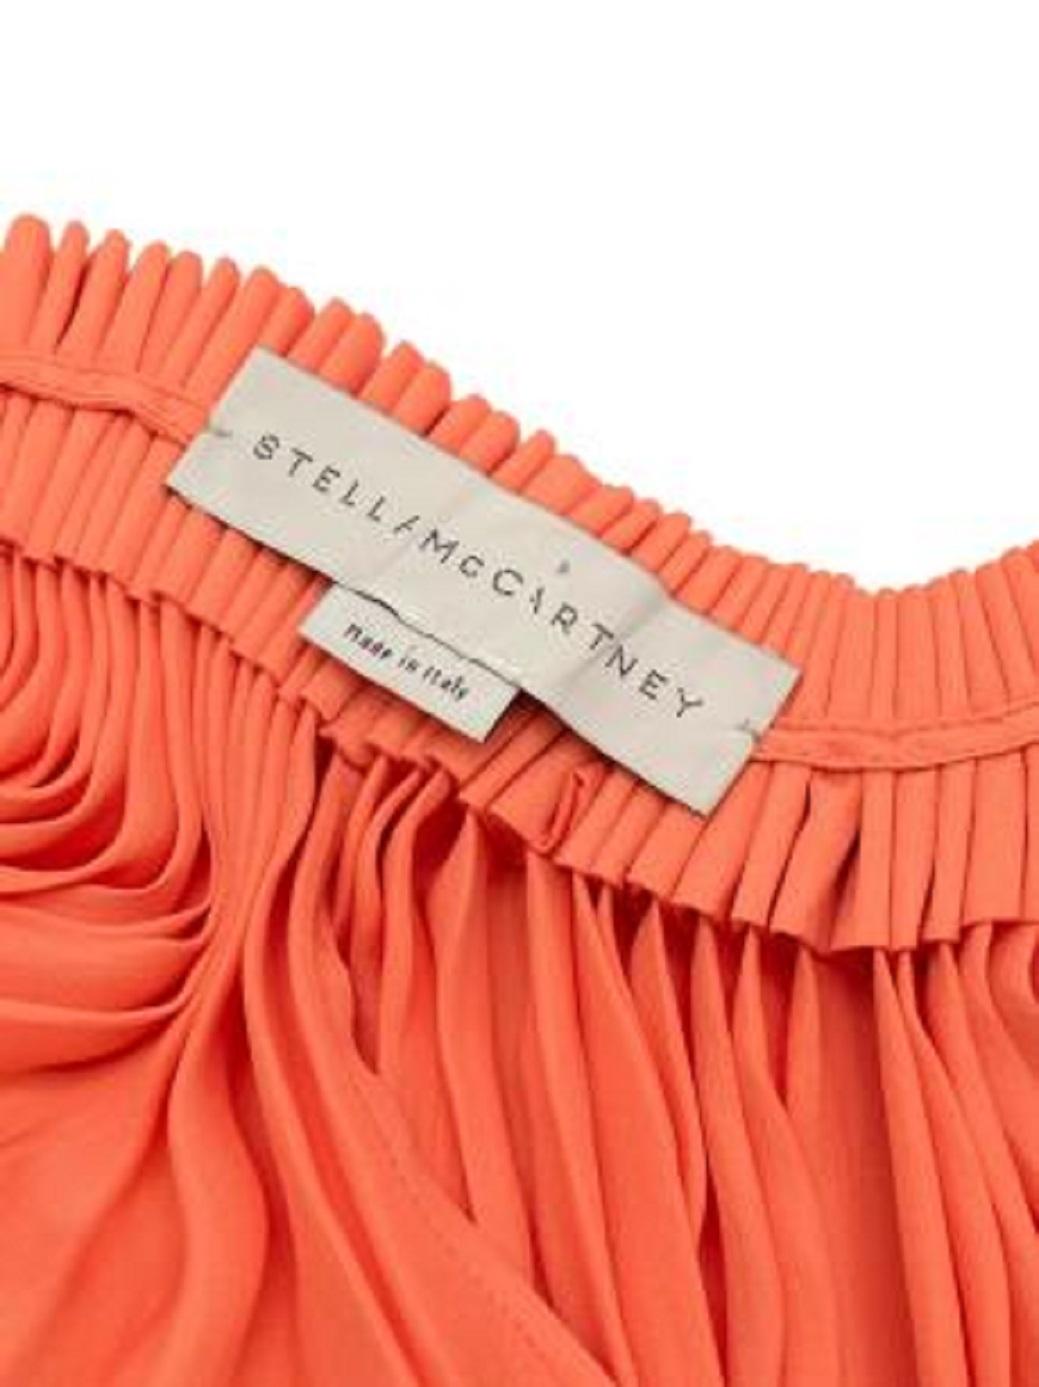 Stella McCartney Coral Pleated Trapeze Dress

- Made of luscious silk.
- trapeze style
- Split at the sides. 
- Frilled top.

Made in Italy. 
Do not wash.


PLEASE NOTE, THESE ITEMS ARE PRE-OWNED AND MAY SHOW SIGNS OF BEING STORED EVEN WHEN UNWORN